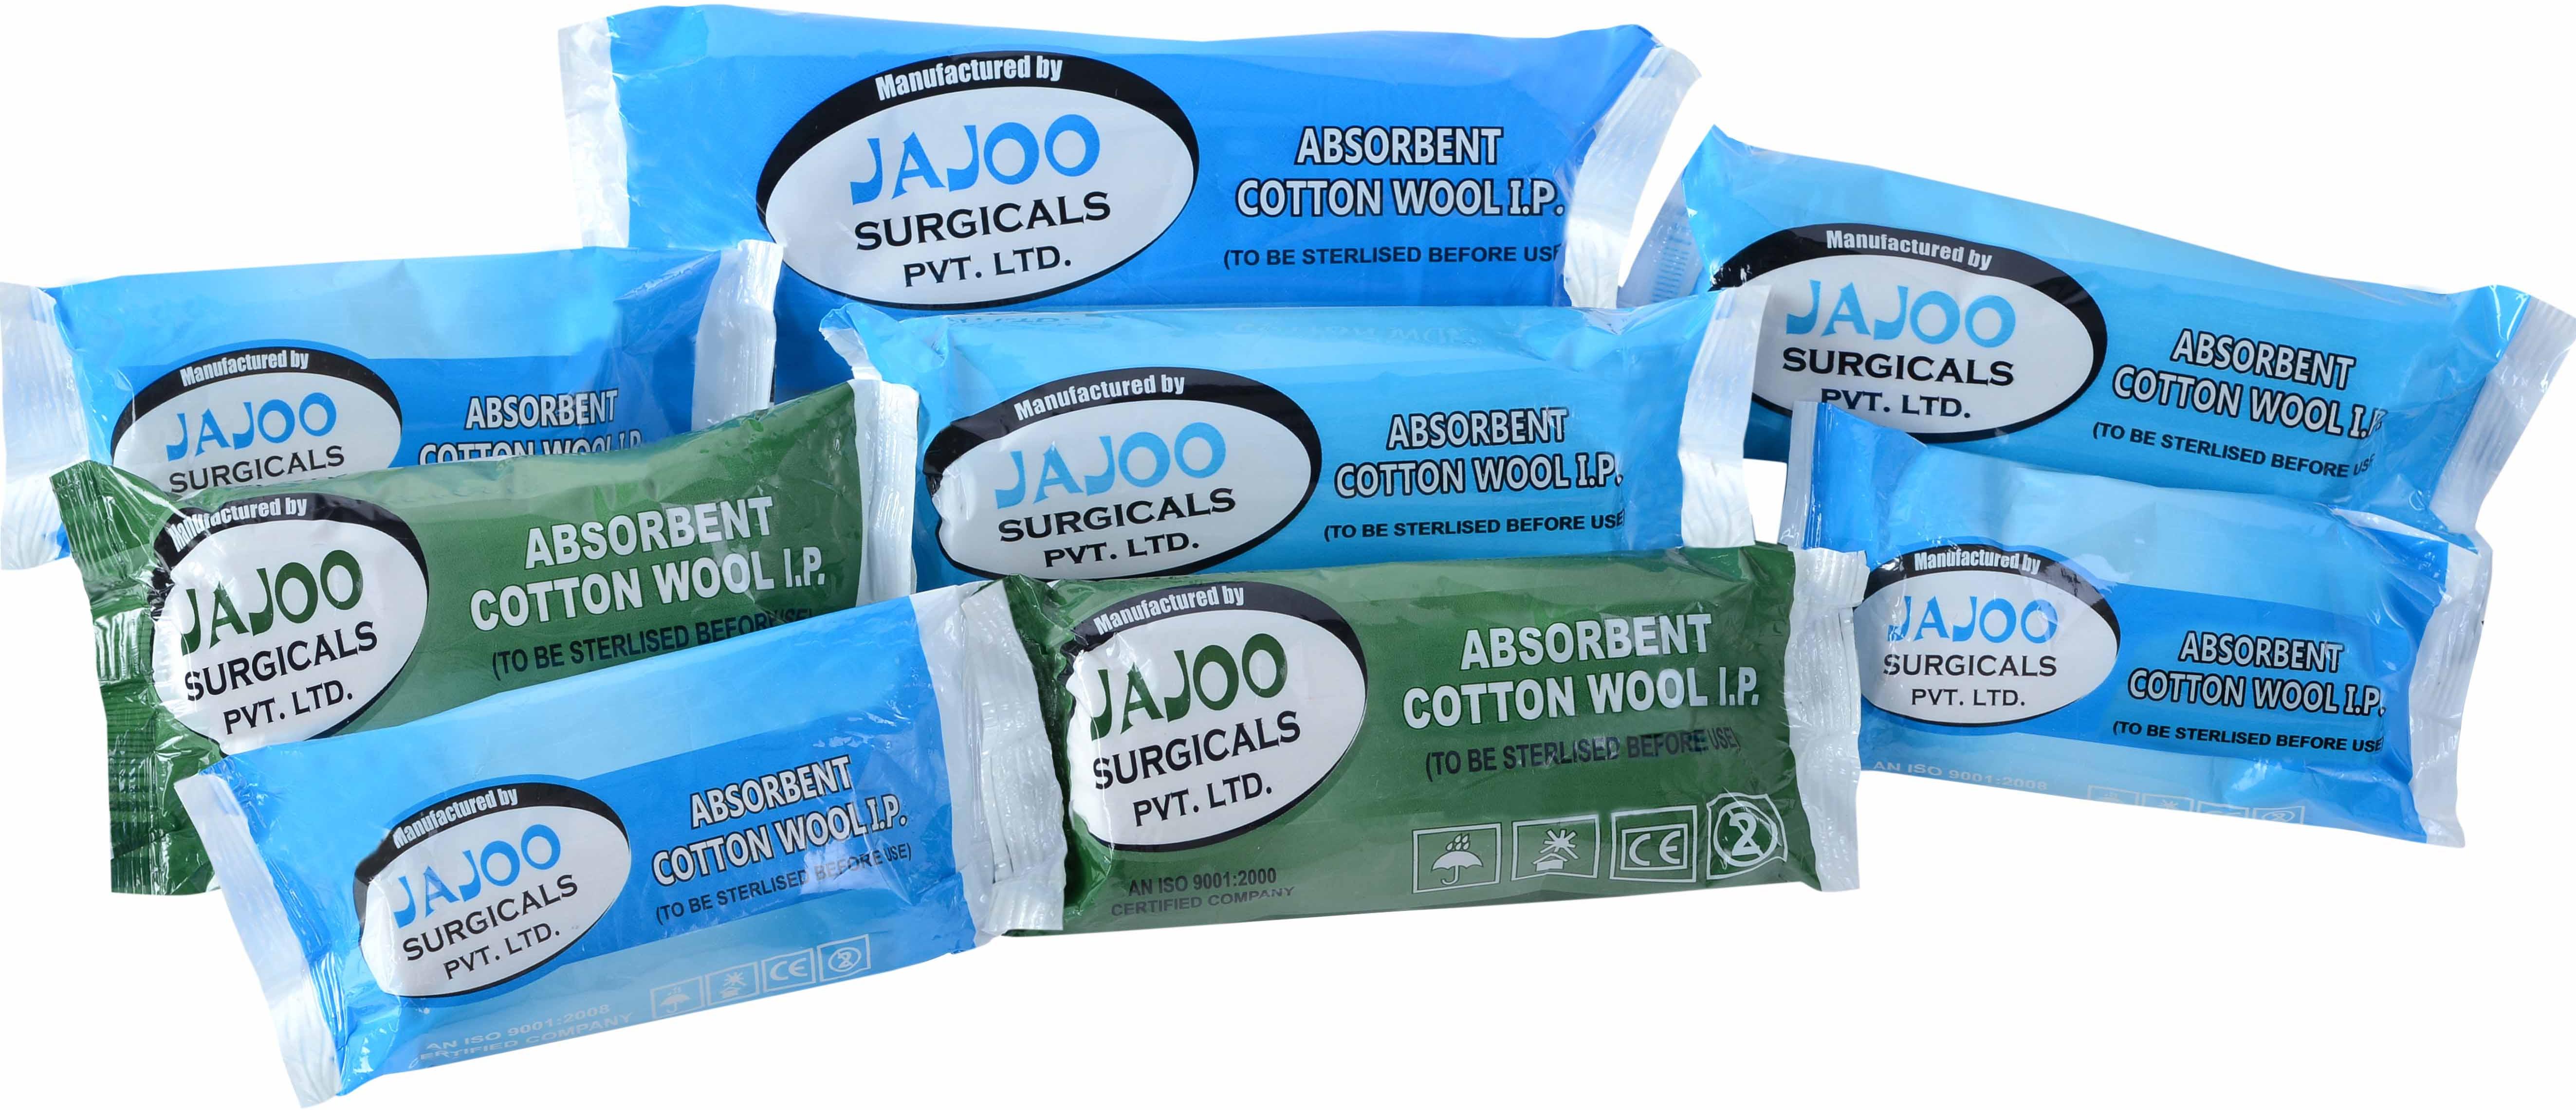 Absorbent Cotton Roll